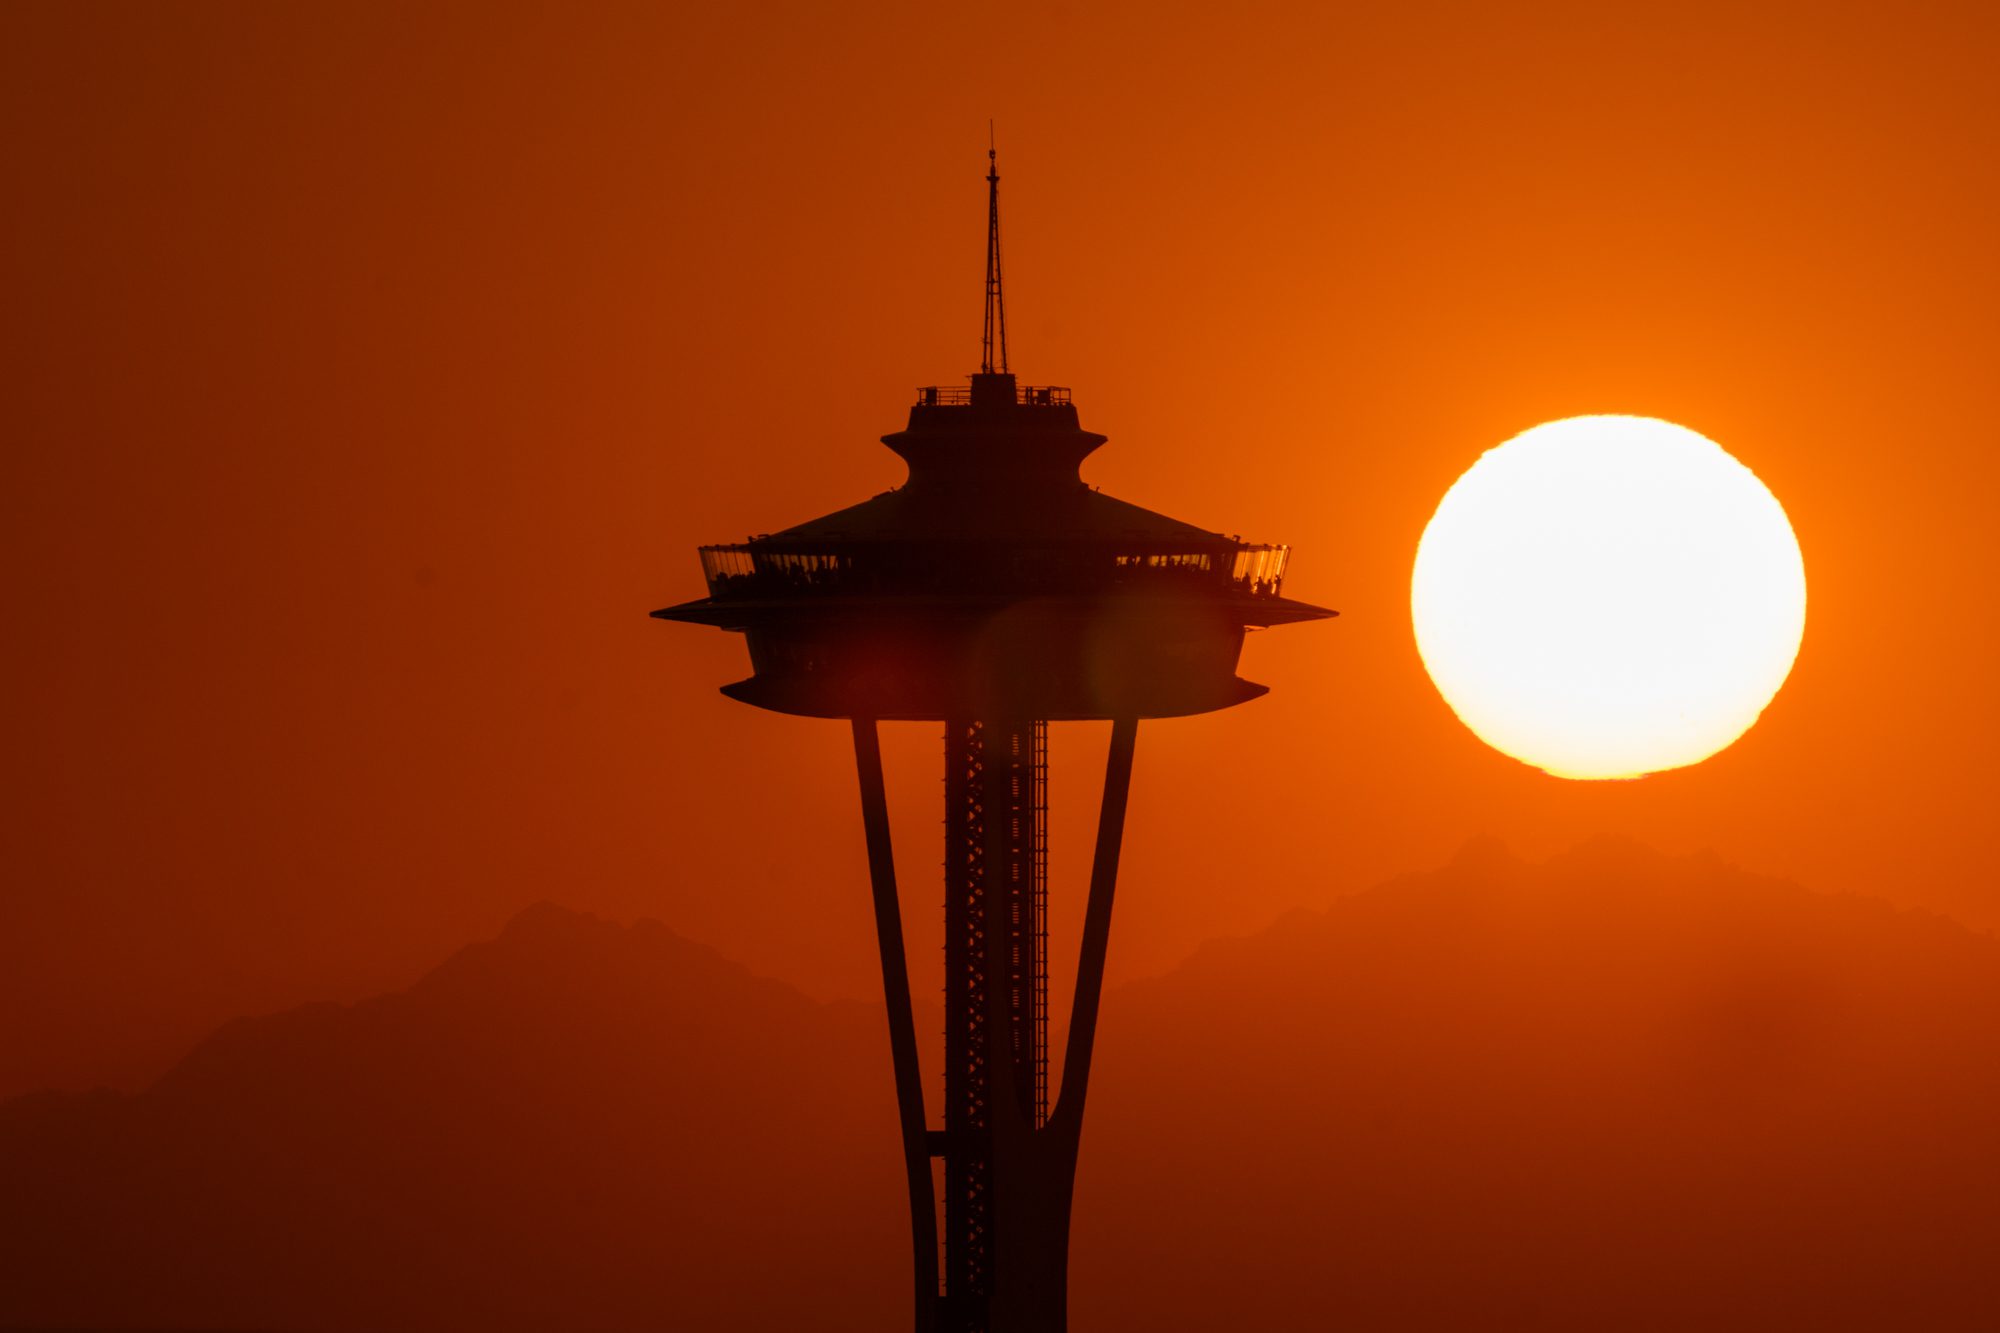 Image of a blazing sun on a hot day next to the Space Needle